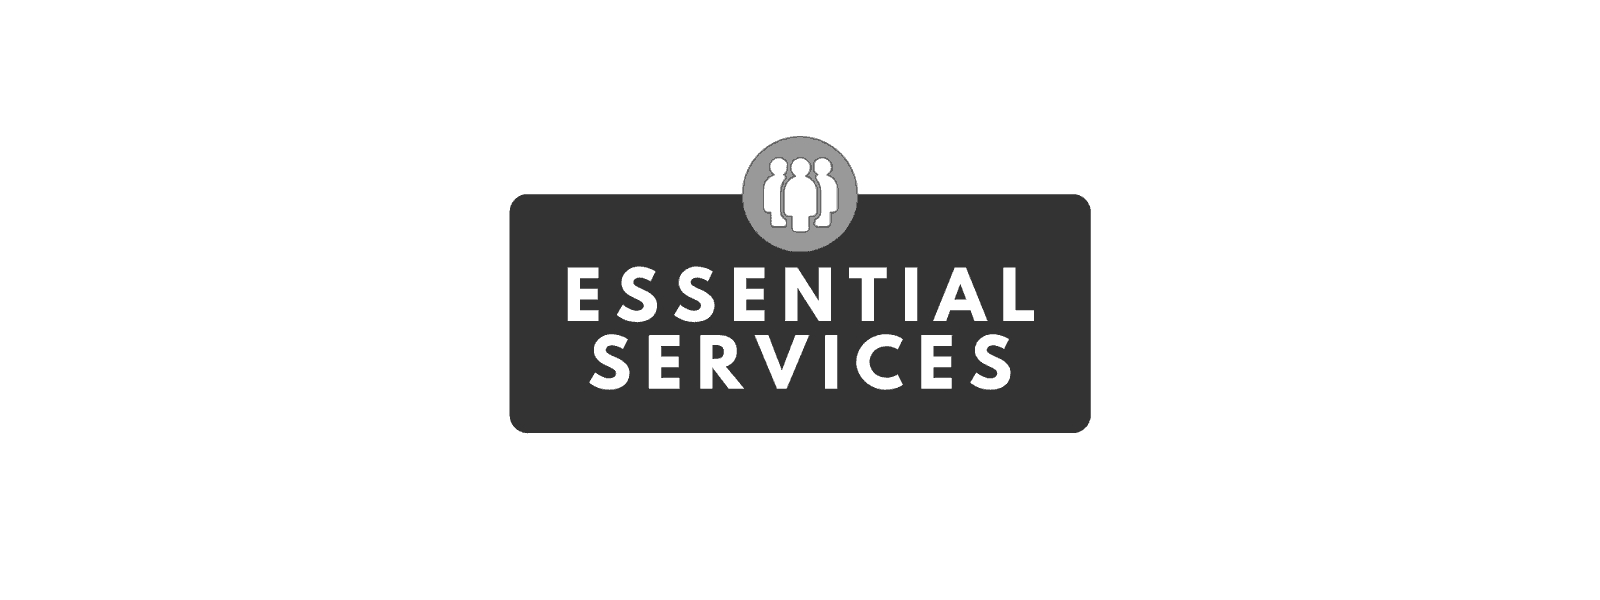 Not Essential? Multiple state services affected